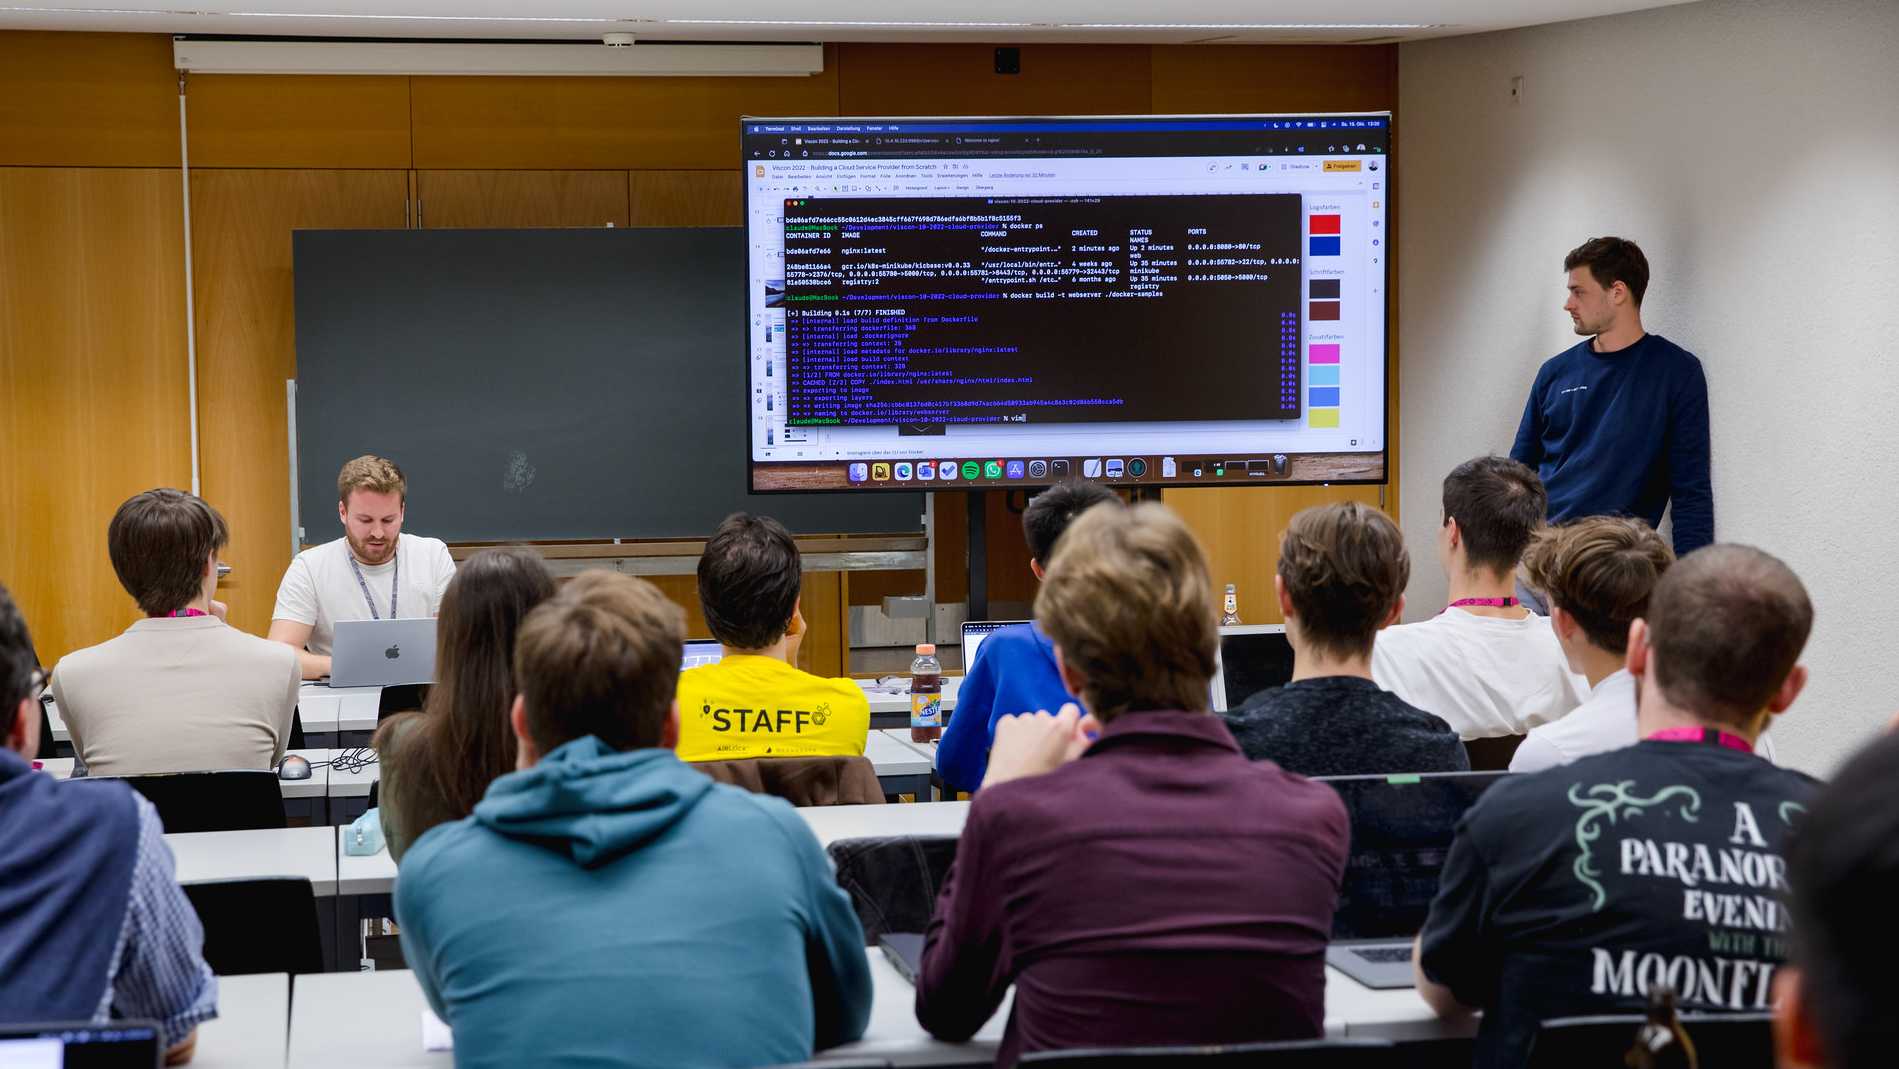 Students sit in a lecture hall and listen to two lecturers. There is a big screen in the front of the room where code is projected.